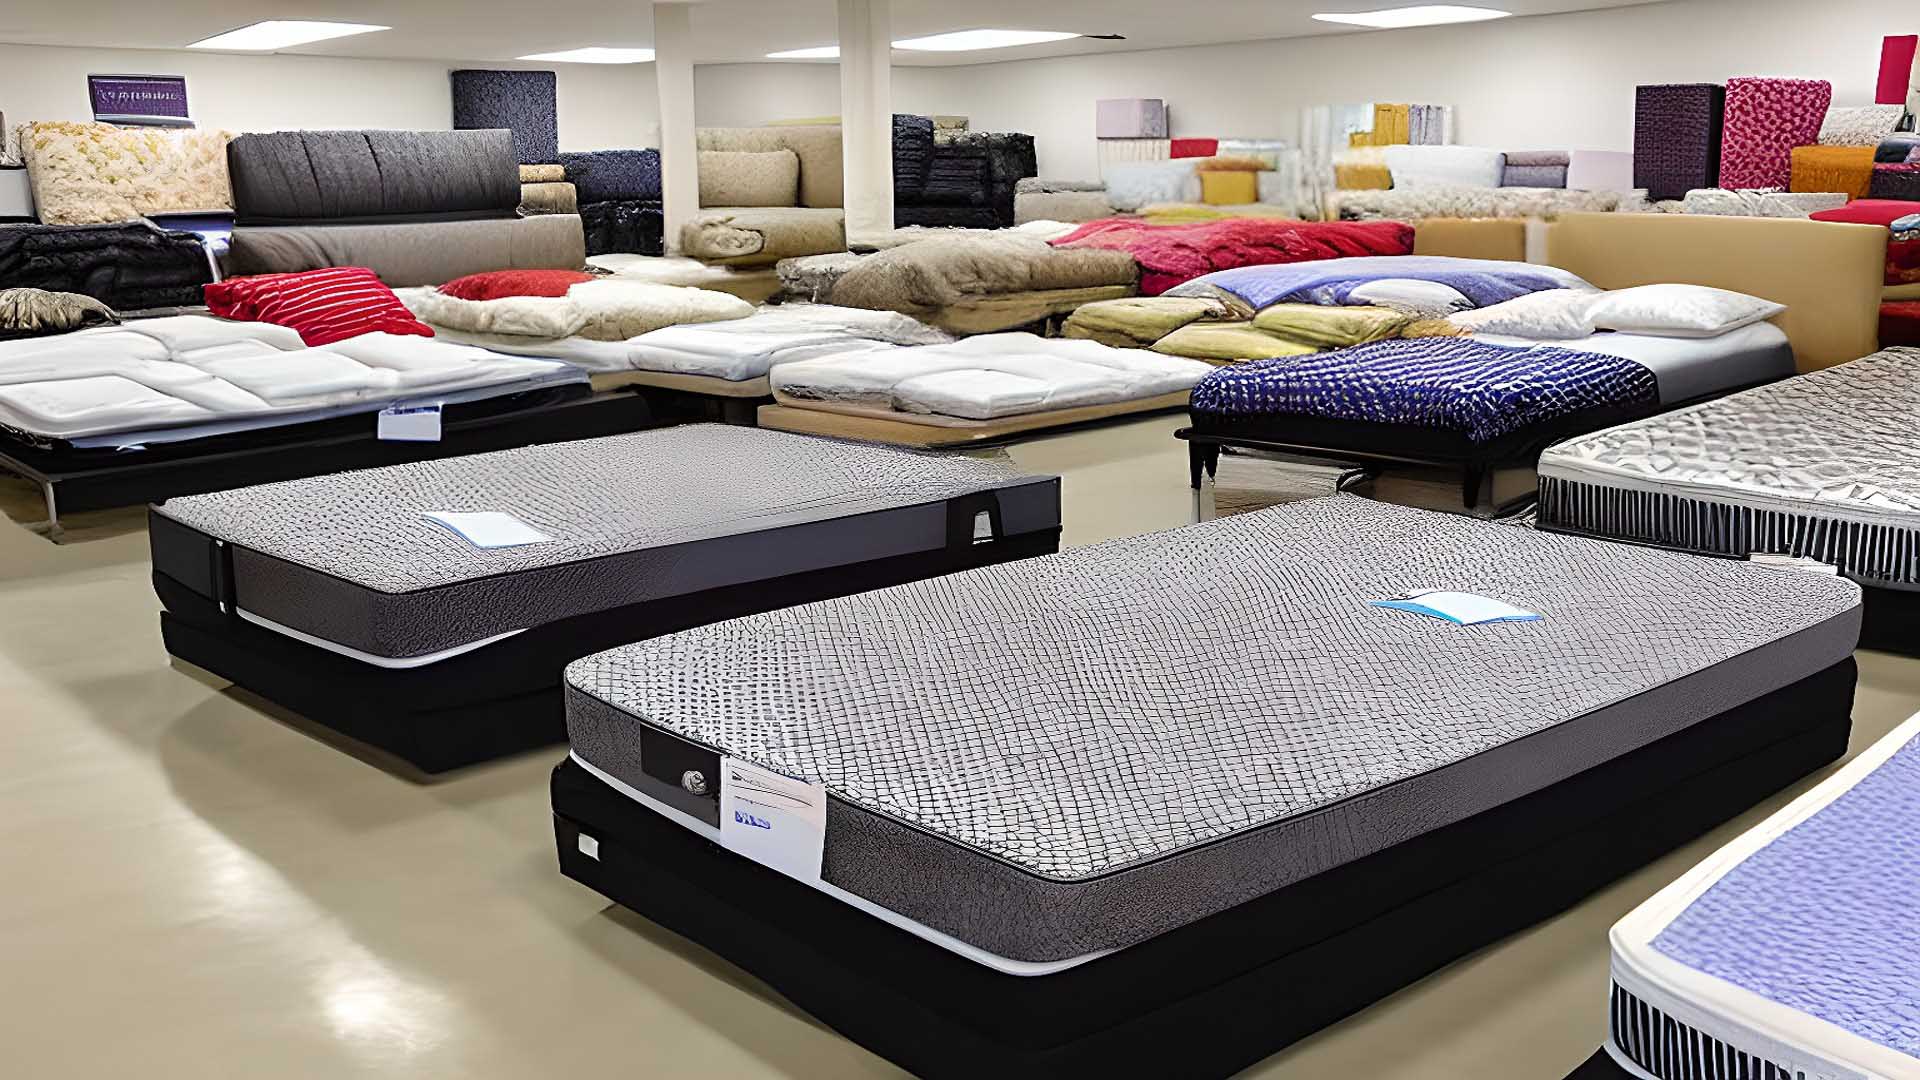 Mattress Sales & Deals in Lawrence, MA